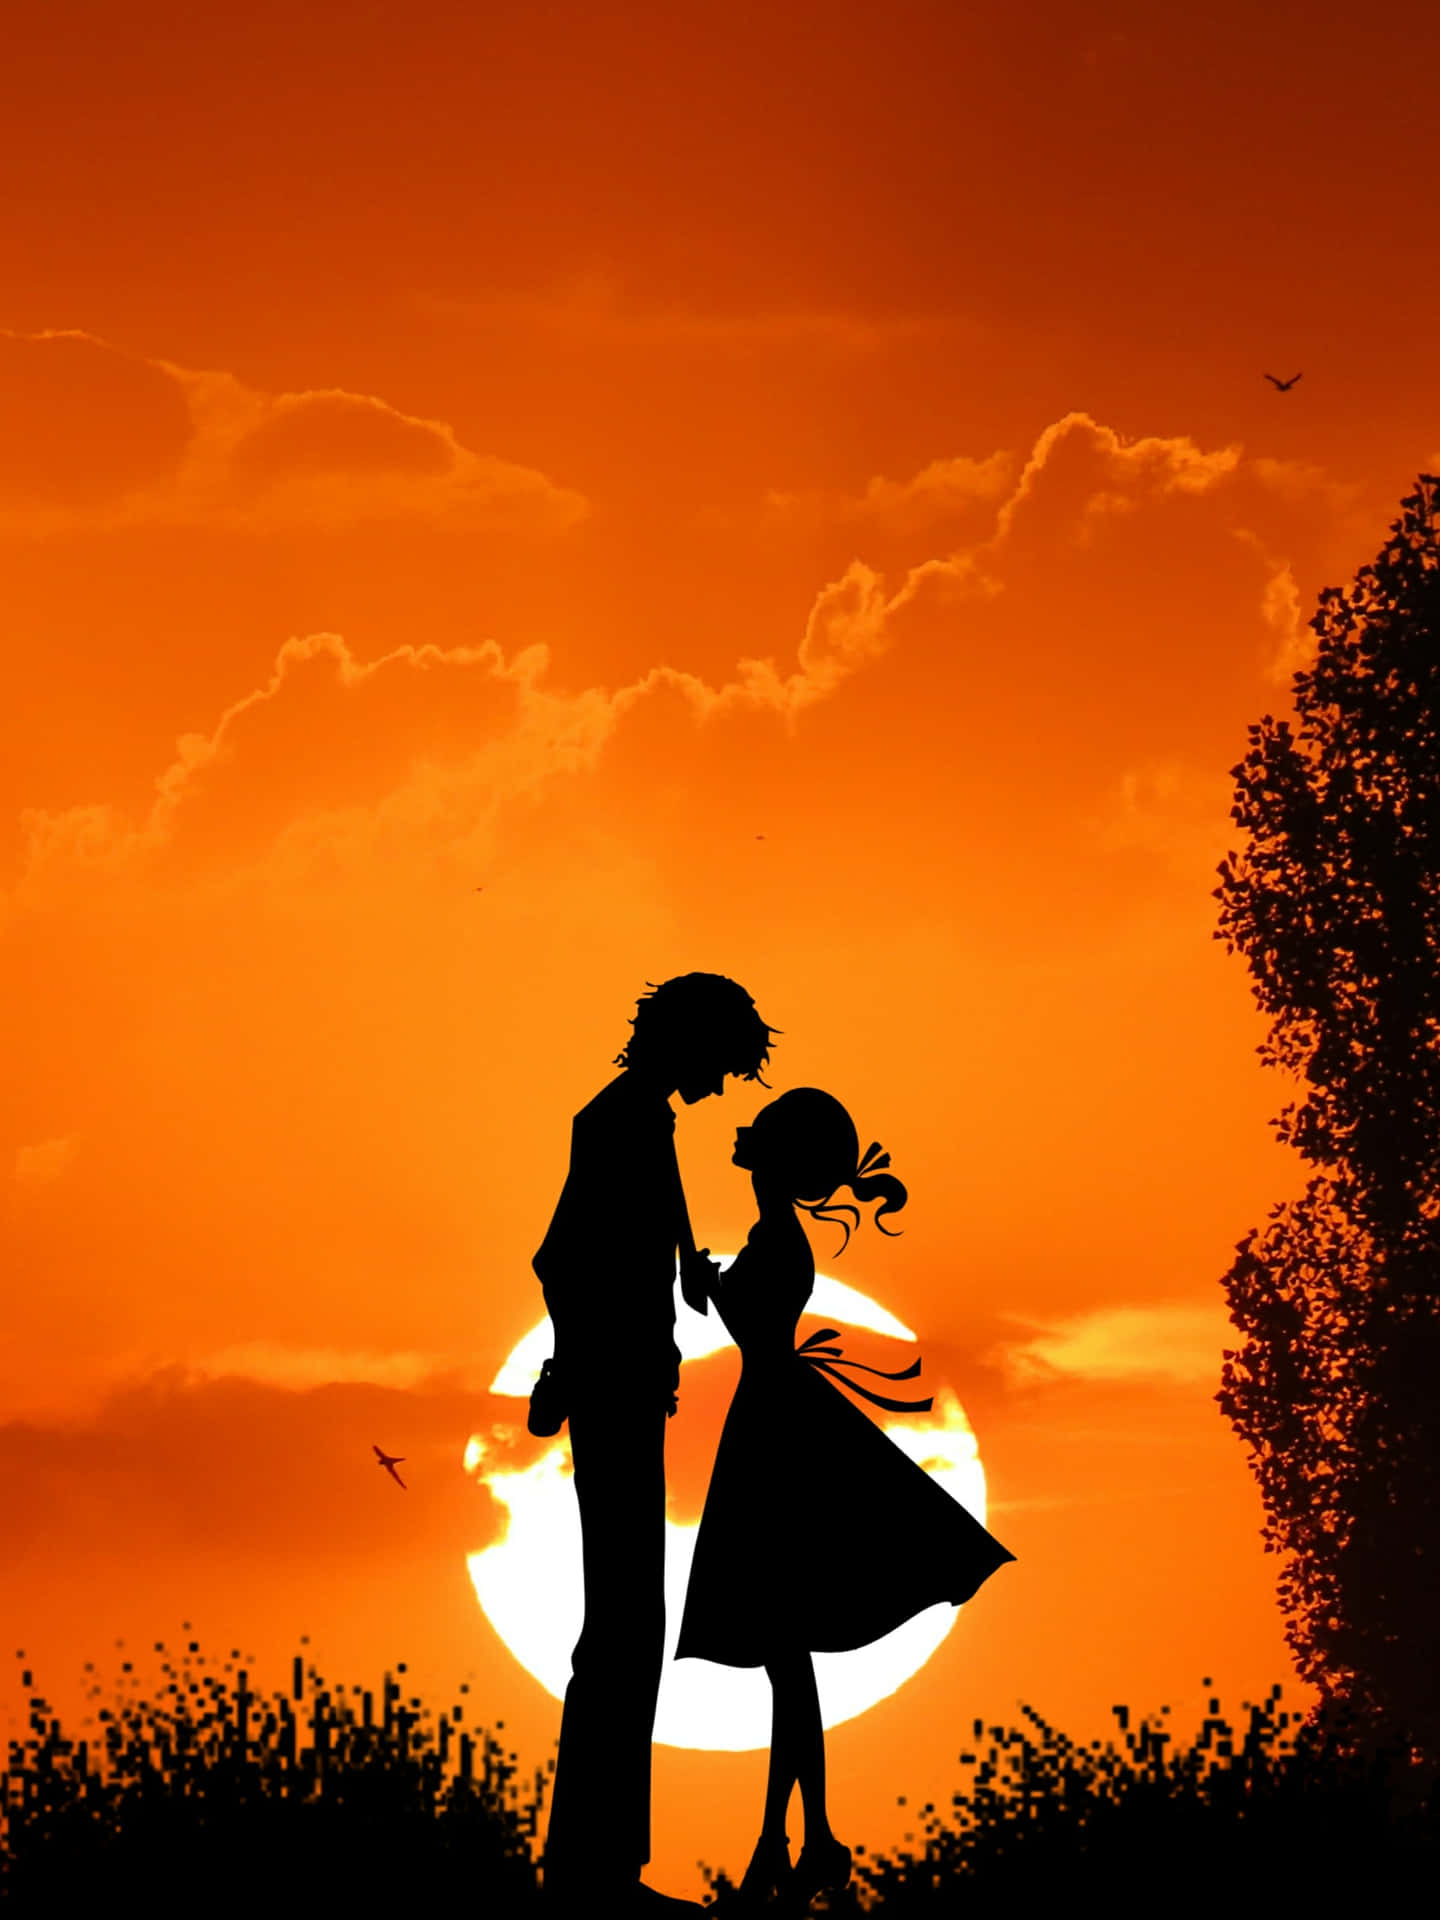 [translation: Picture Of A Couple Silhouette At Sunset On A Grassy Field.]